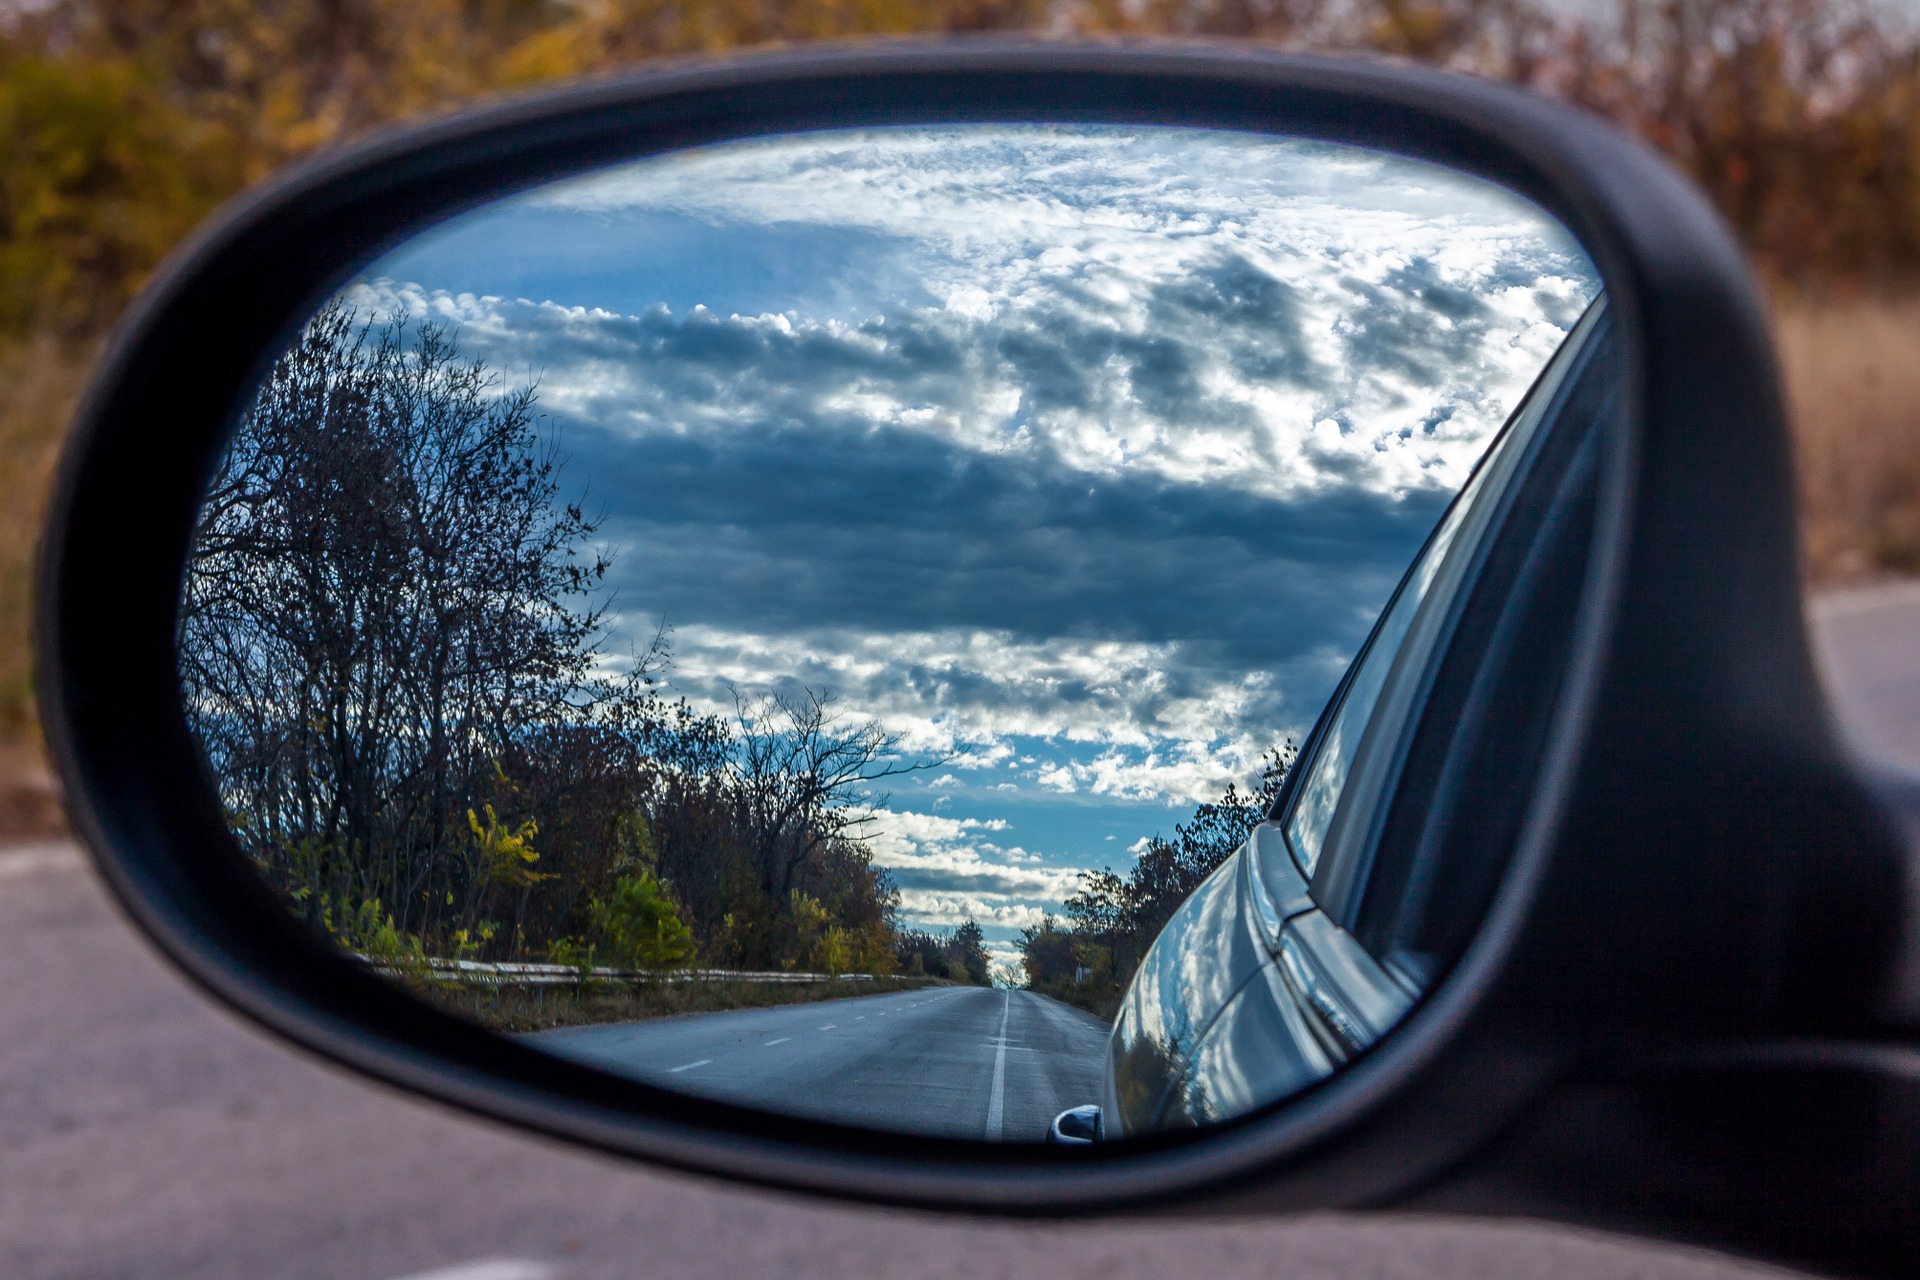 Road reflected in side mirror.